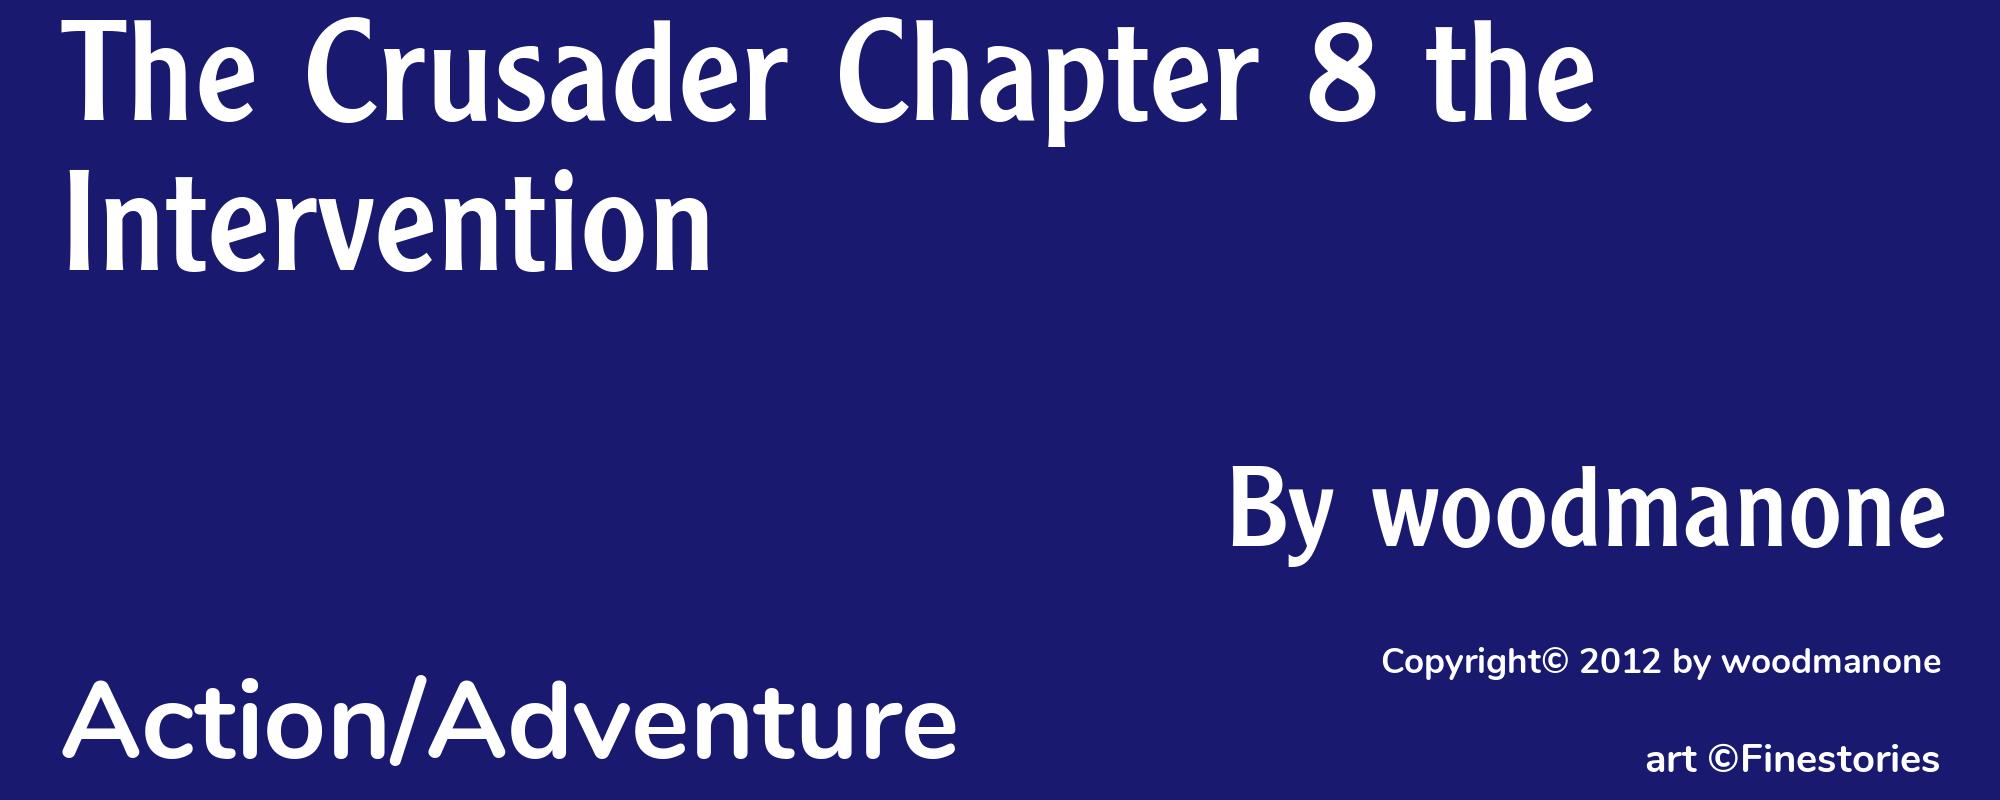 The Crusader Chapter 8 the Intervention - Cover